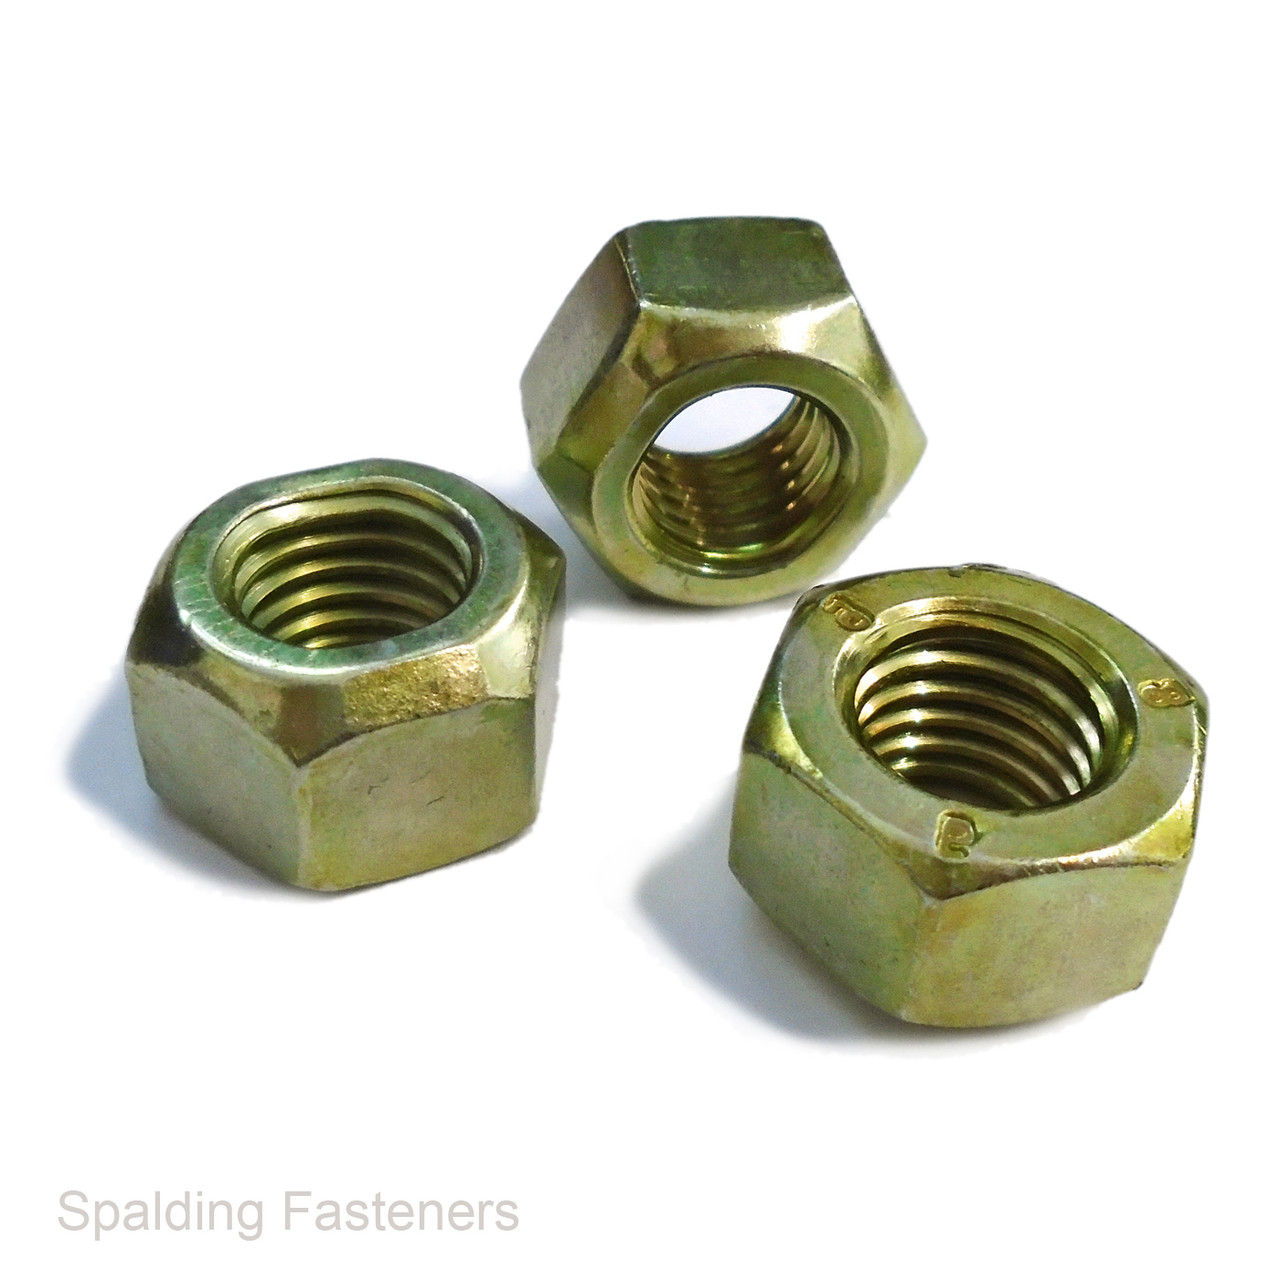 What Are Self-Locking Nuts?